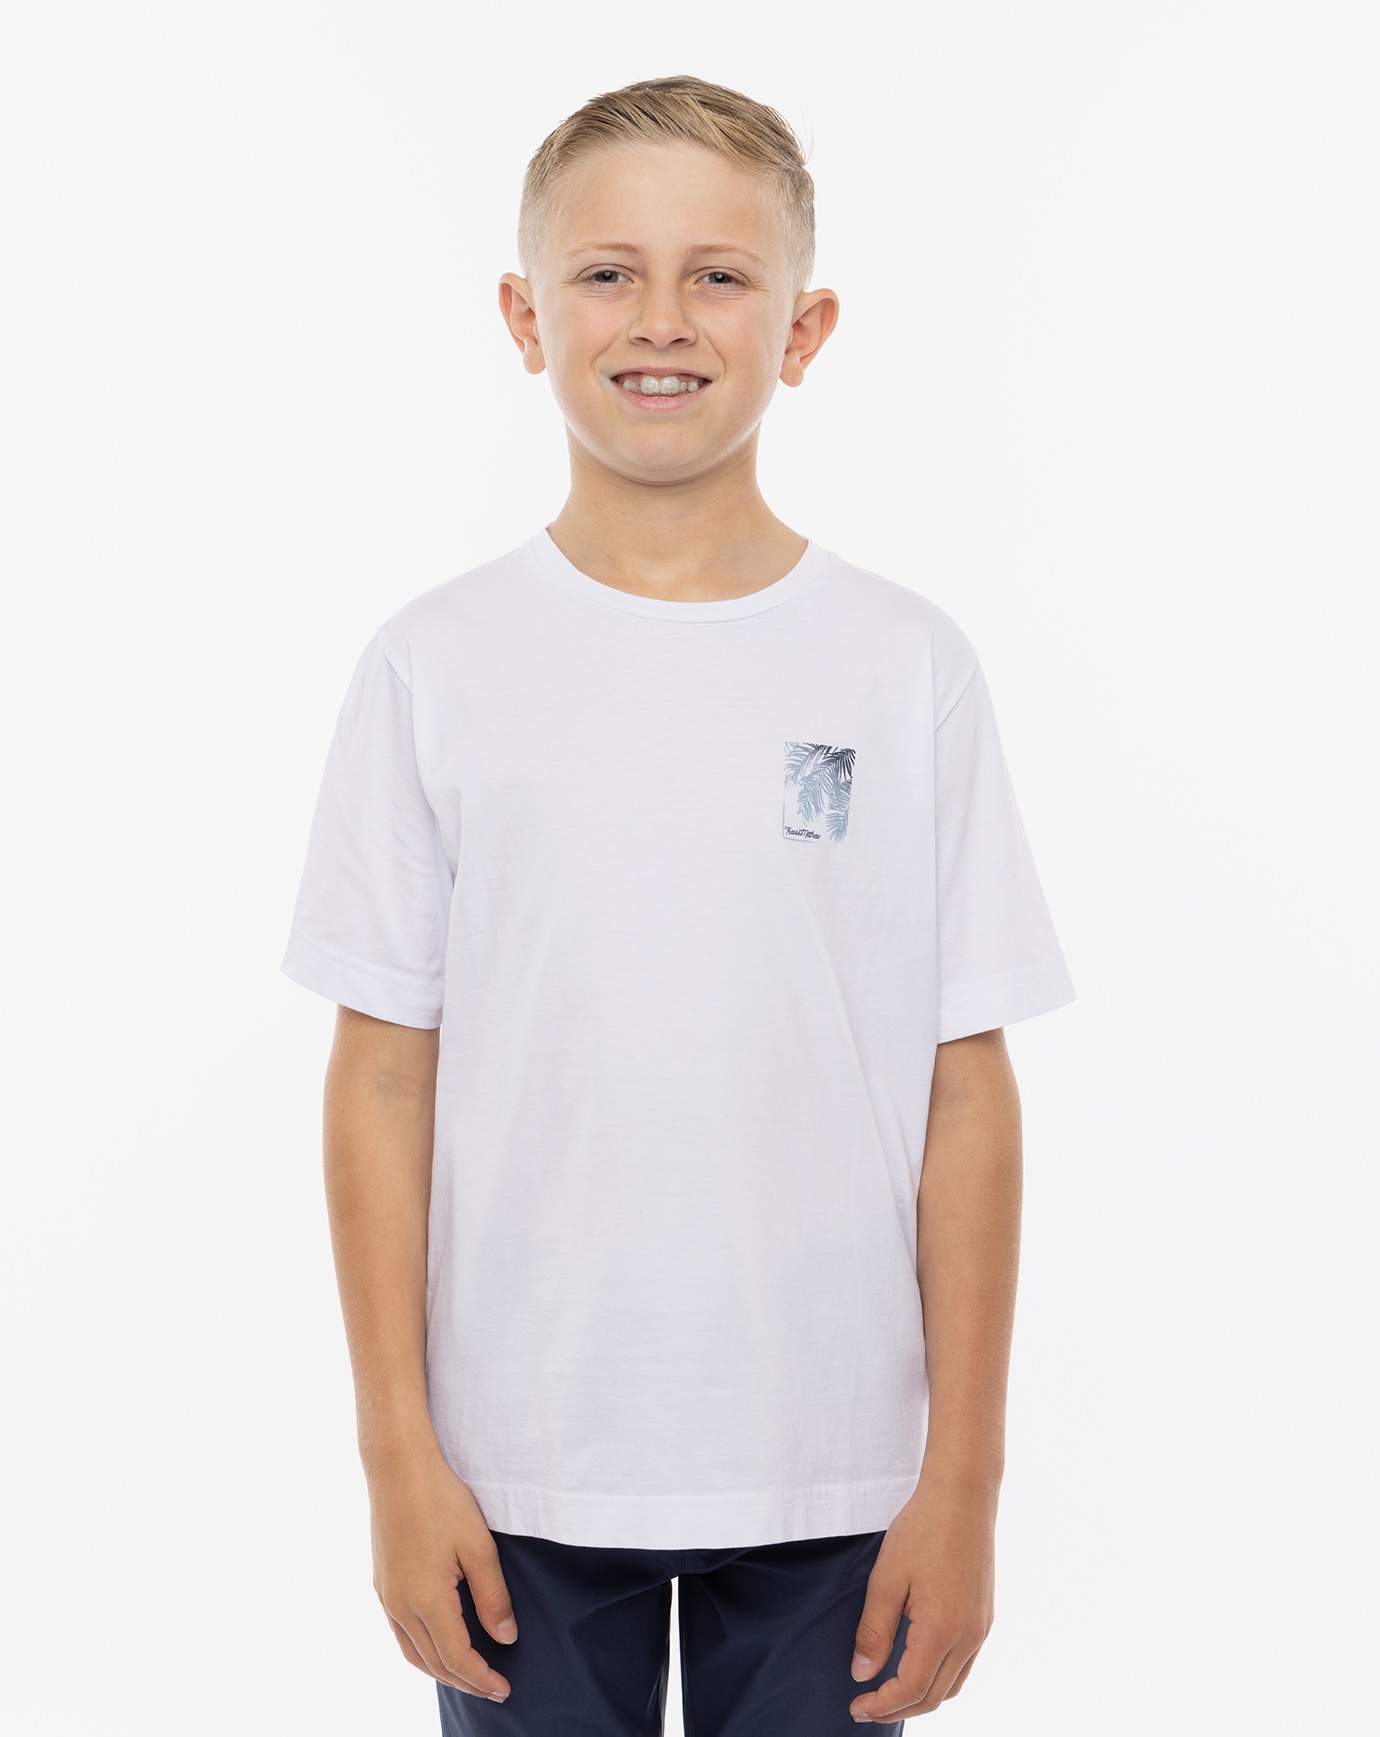 Related Product - COAST CRUISER YOUTH TEE